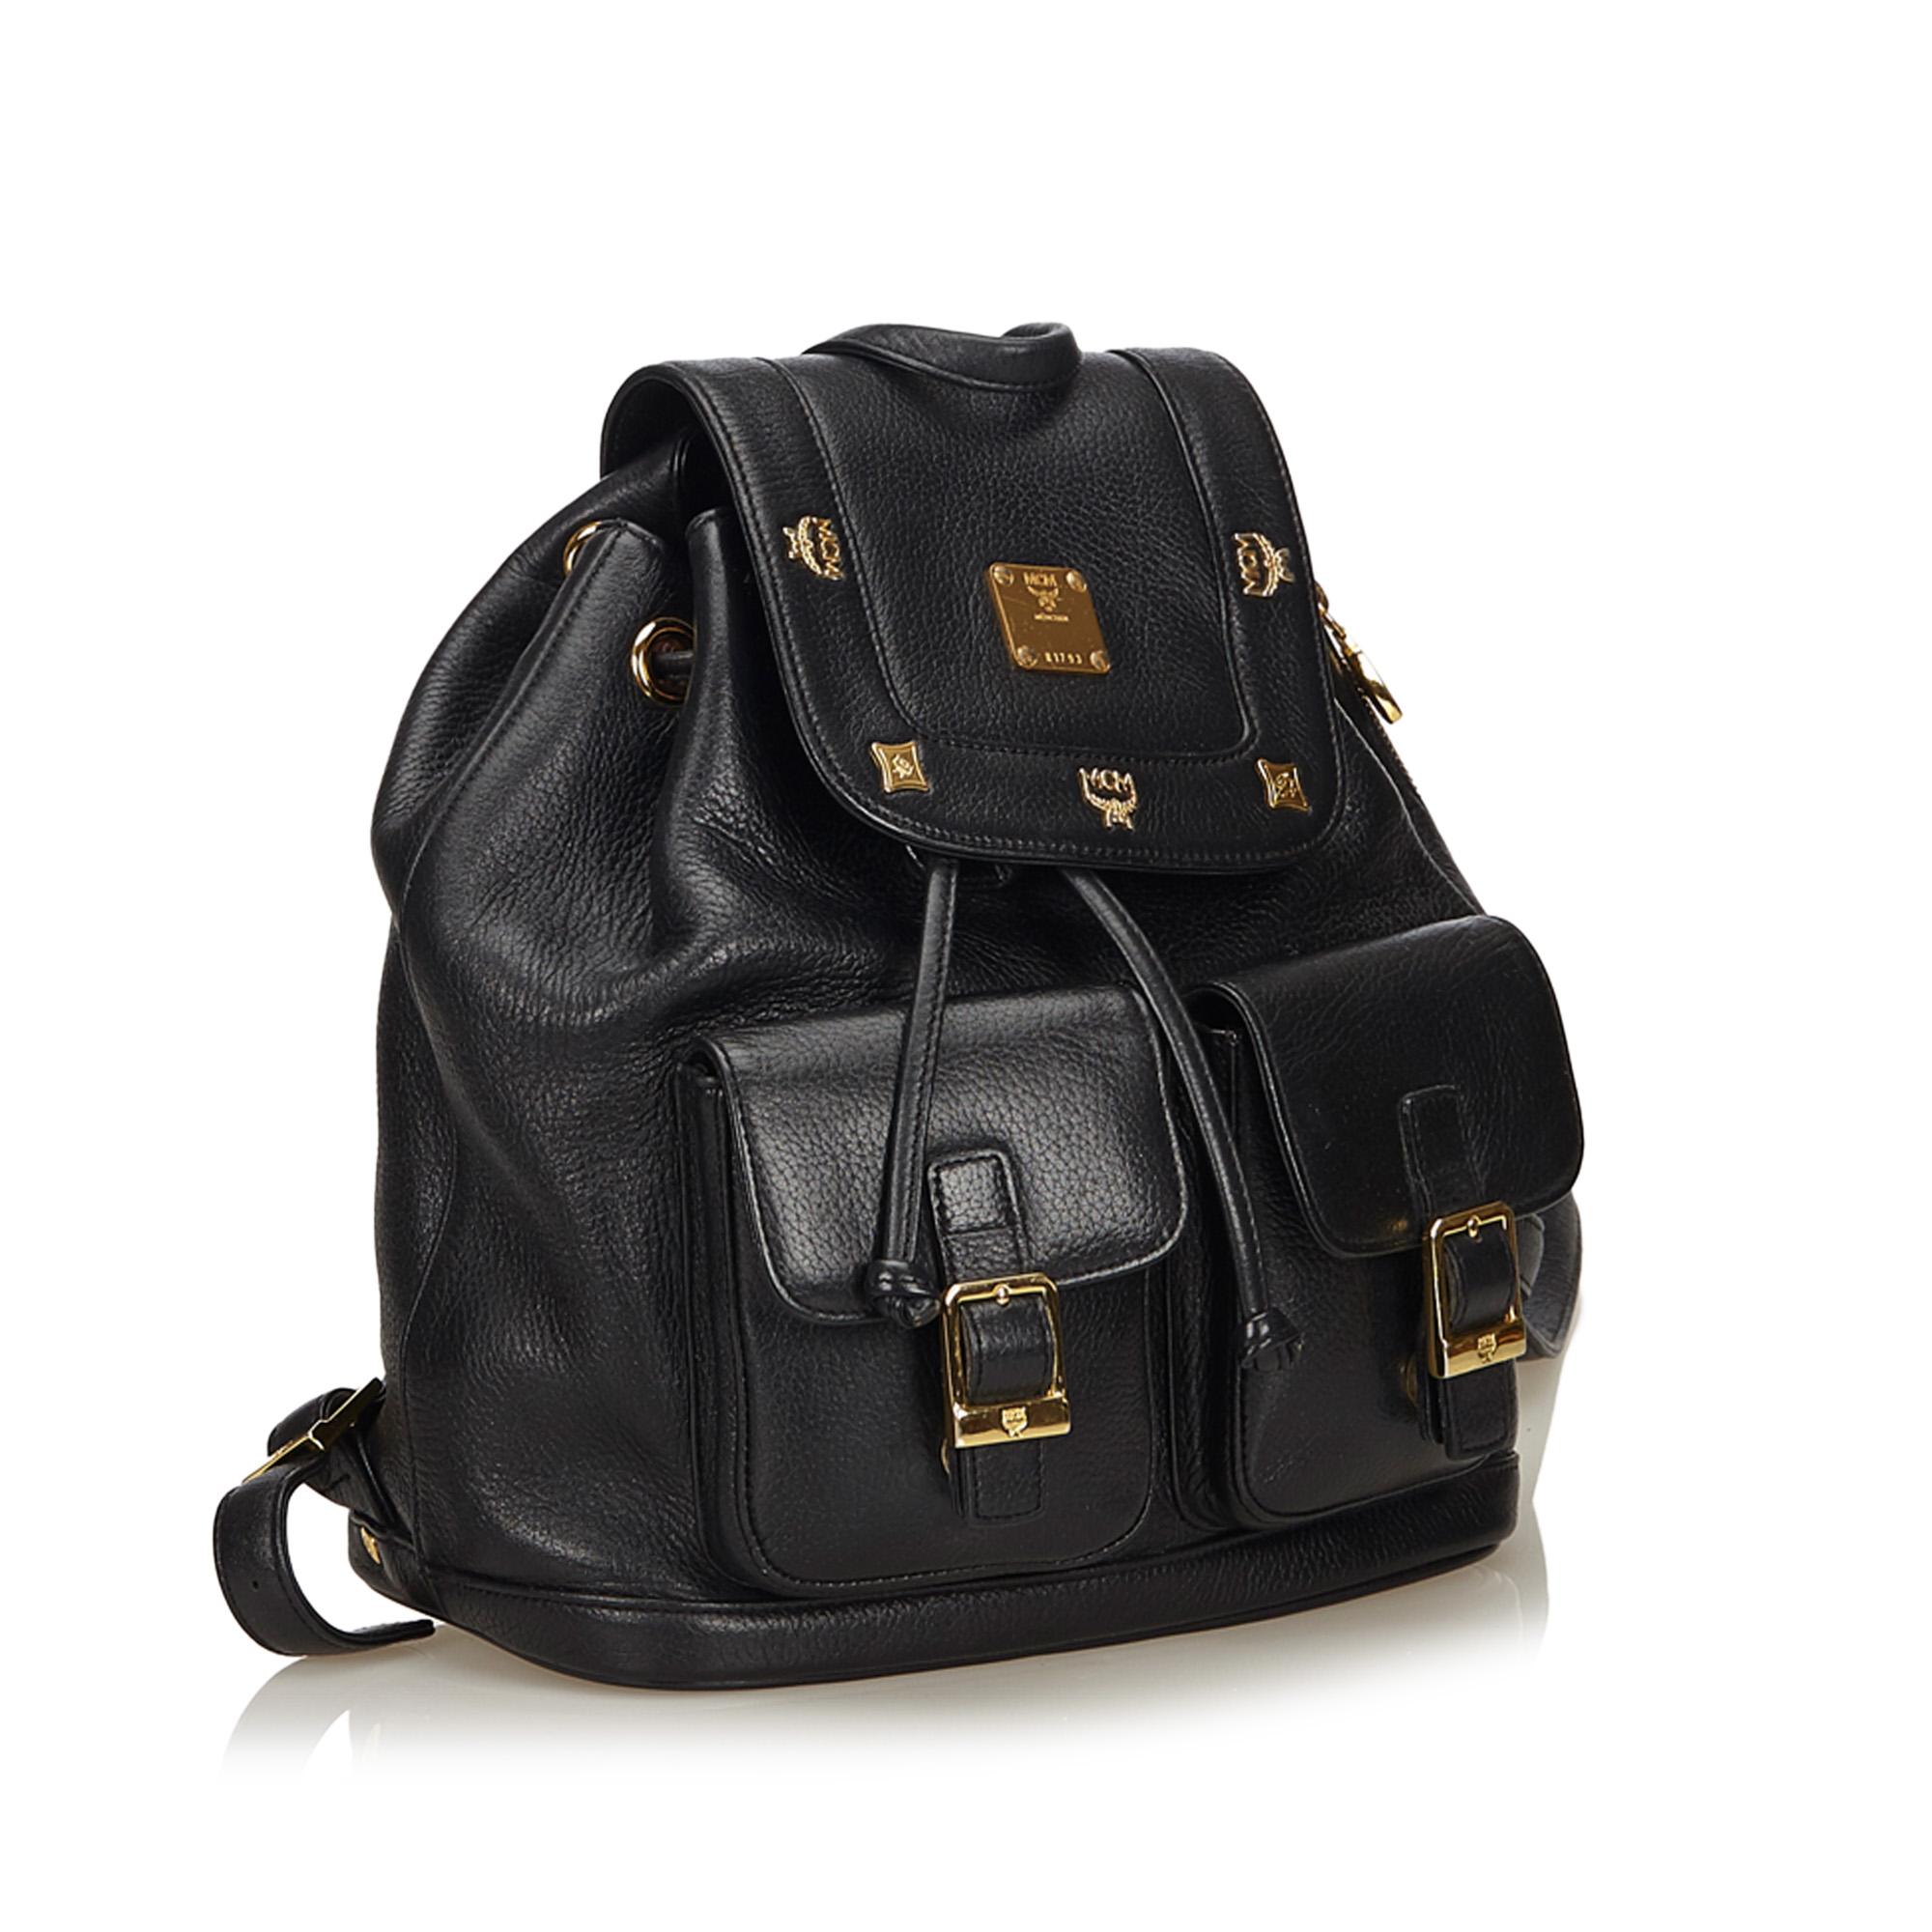 This backpack features a leather body, exterior front flap pockets, gold-tone hardware, flat leather straps, top flap with drawstring closure, and interior zip pocket. It carries as B condition rating.

Inclusions: 
This item does not come with